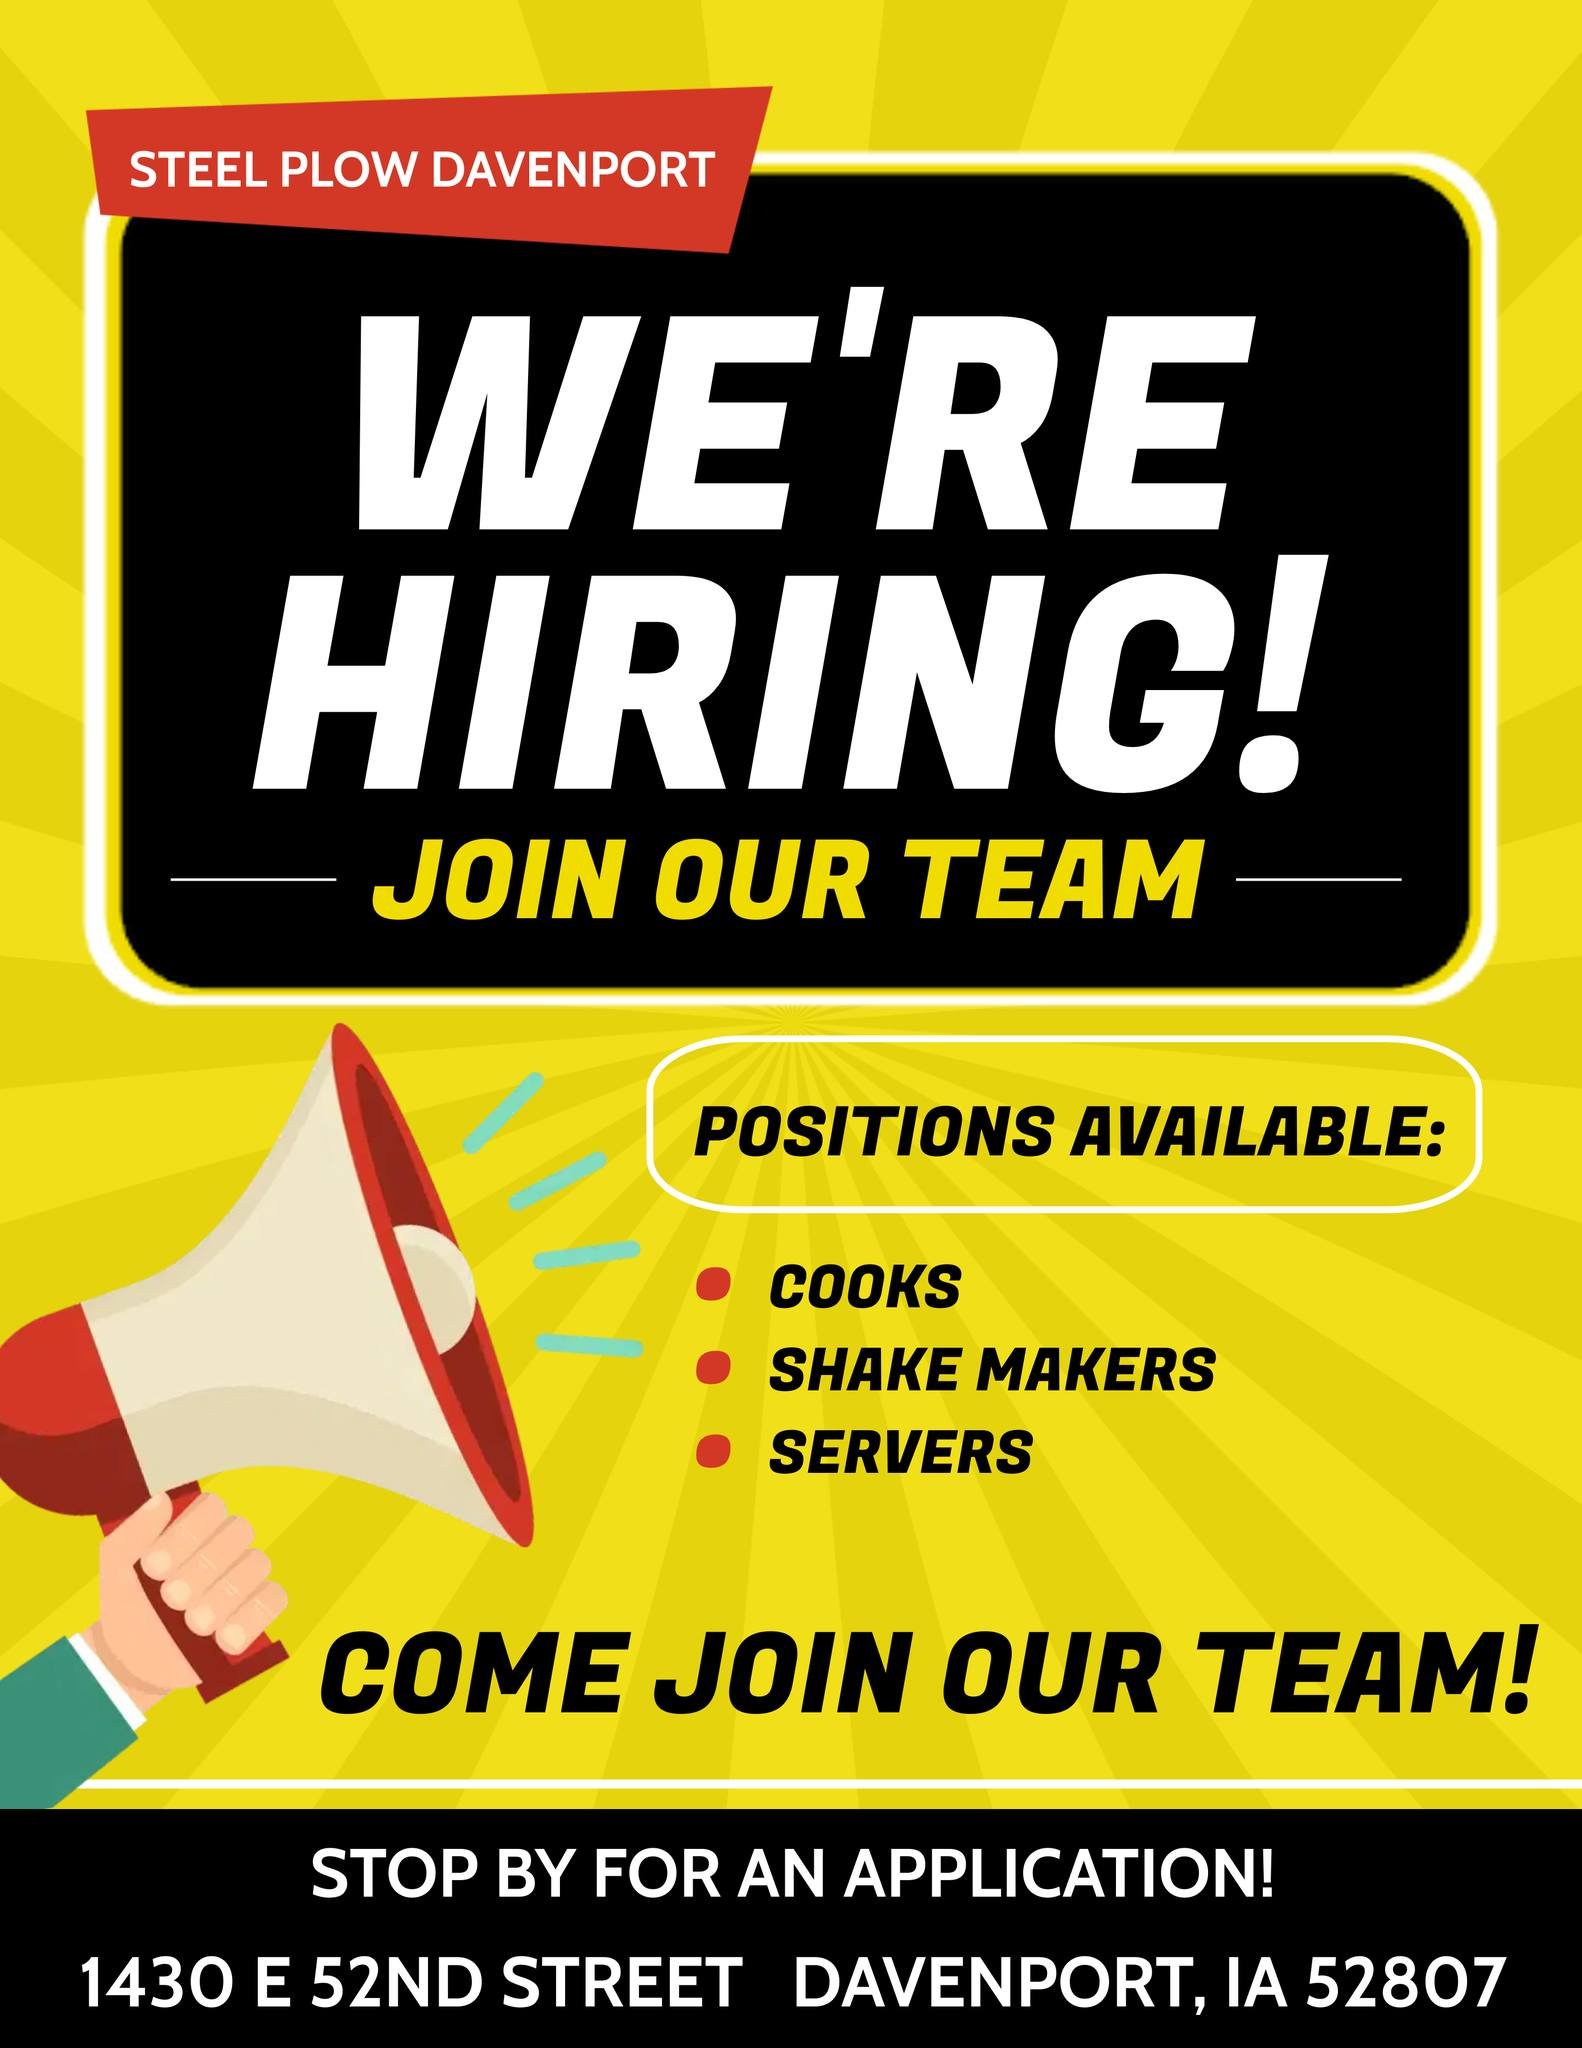 Come join our team! Hiring all positions!